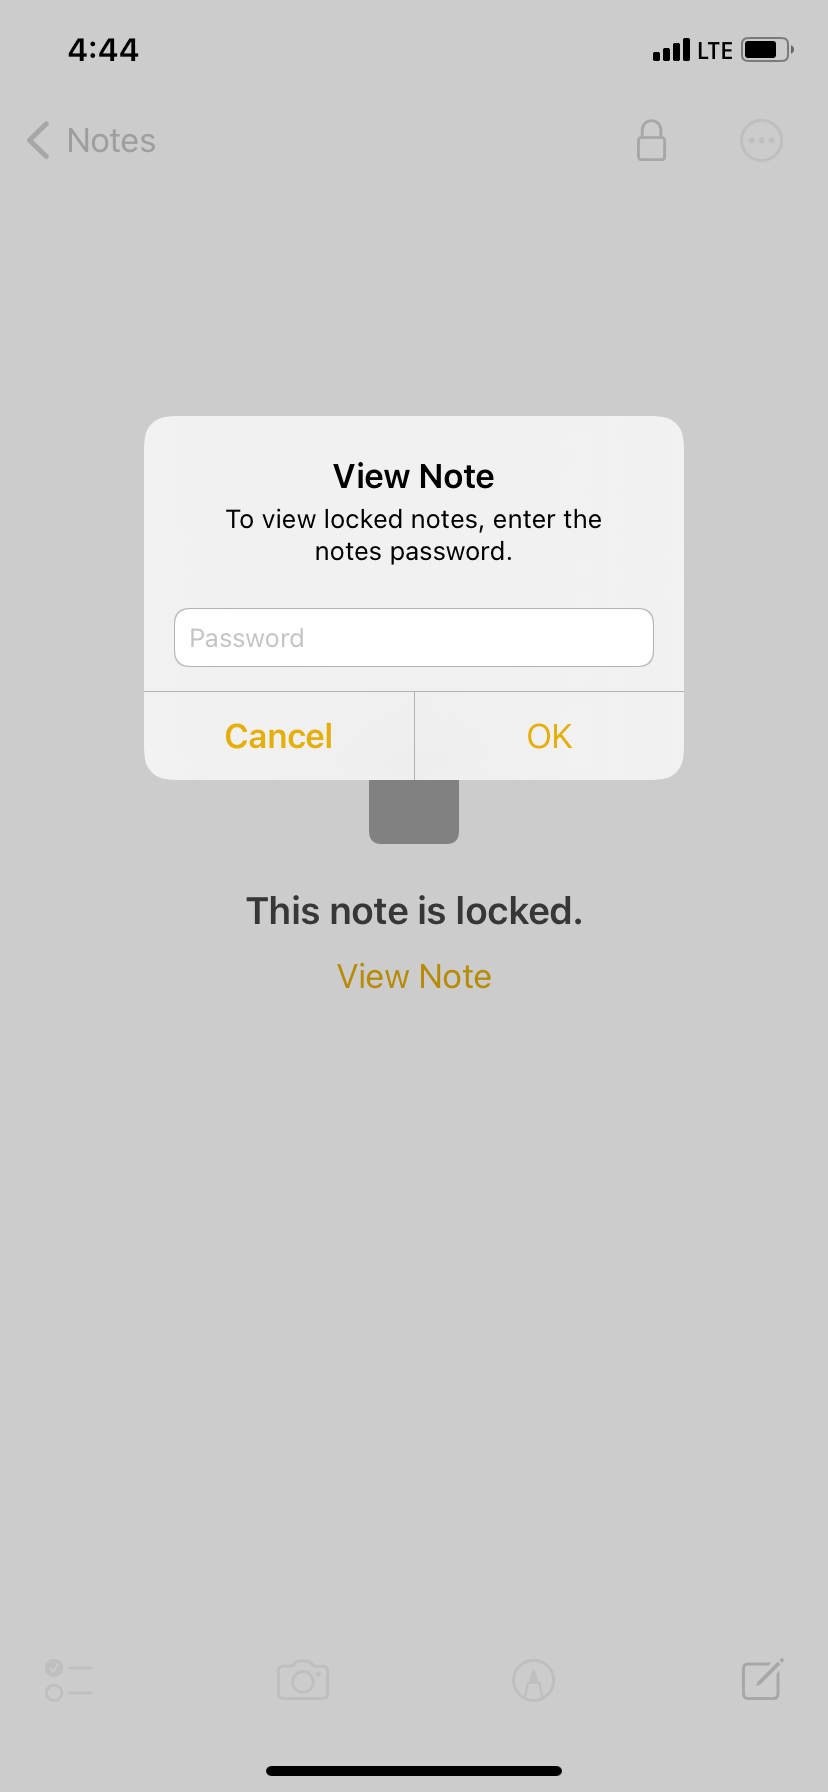 Image shows the View Note option inside Apple Notes